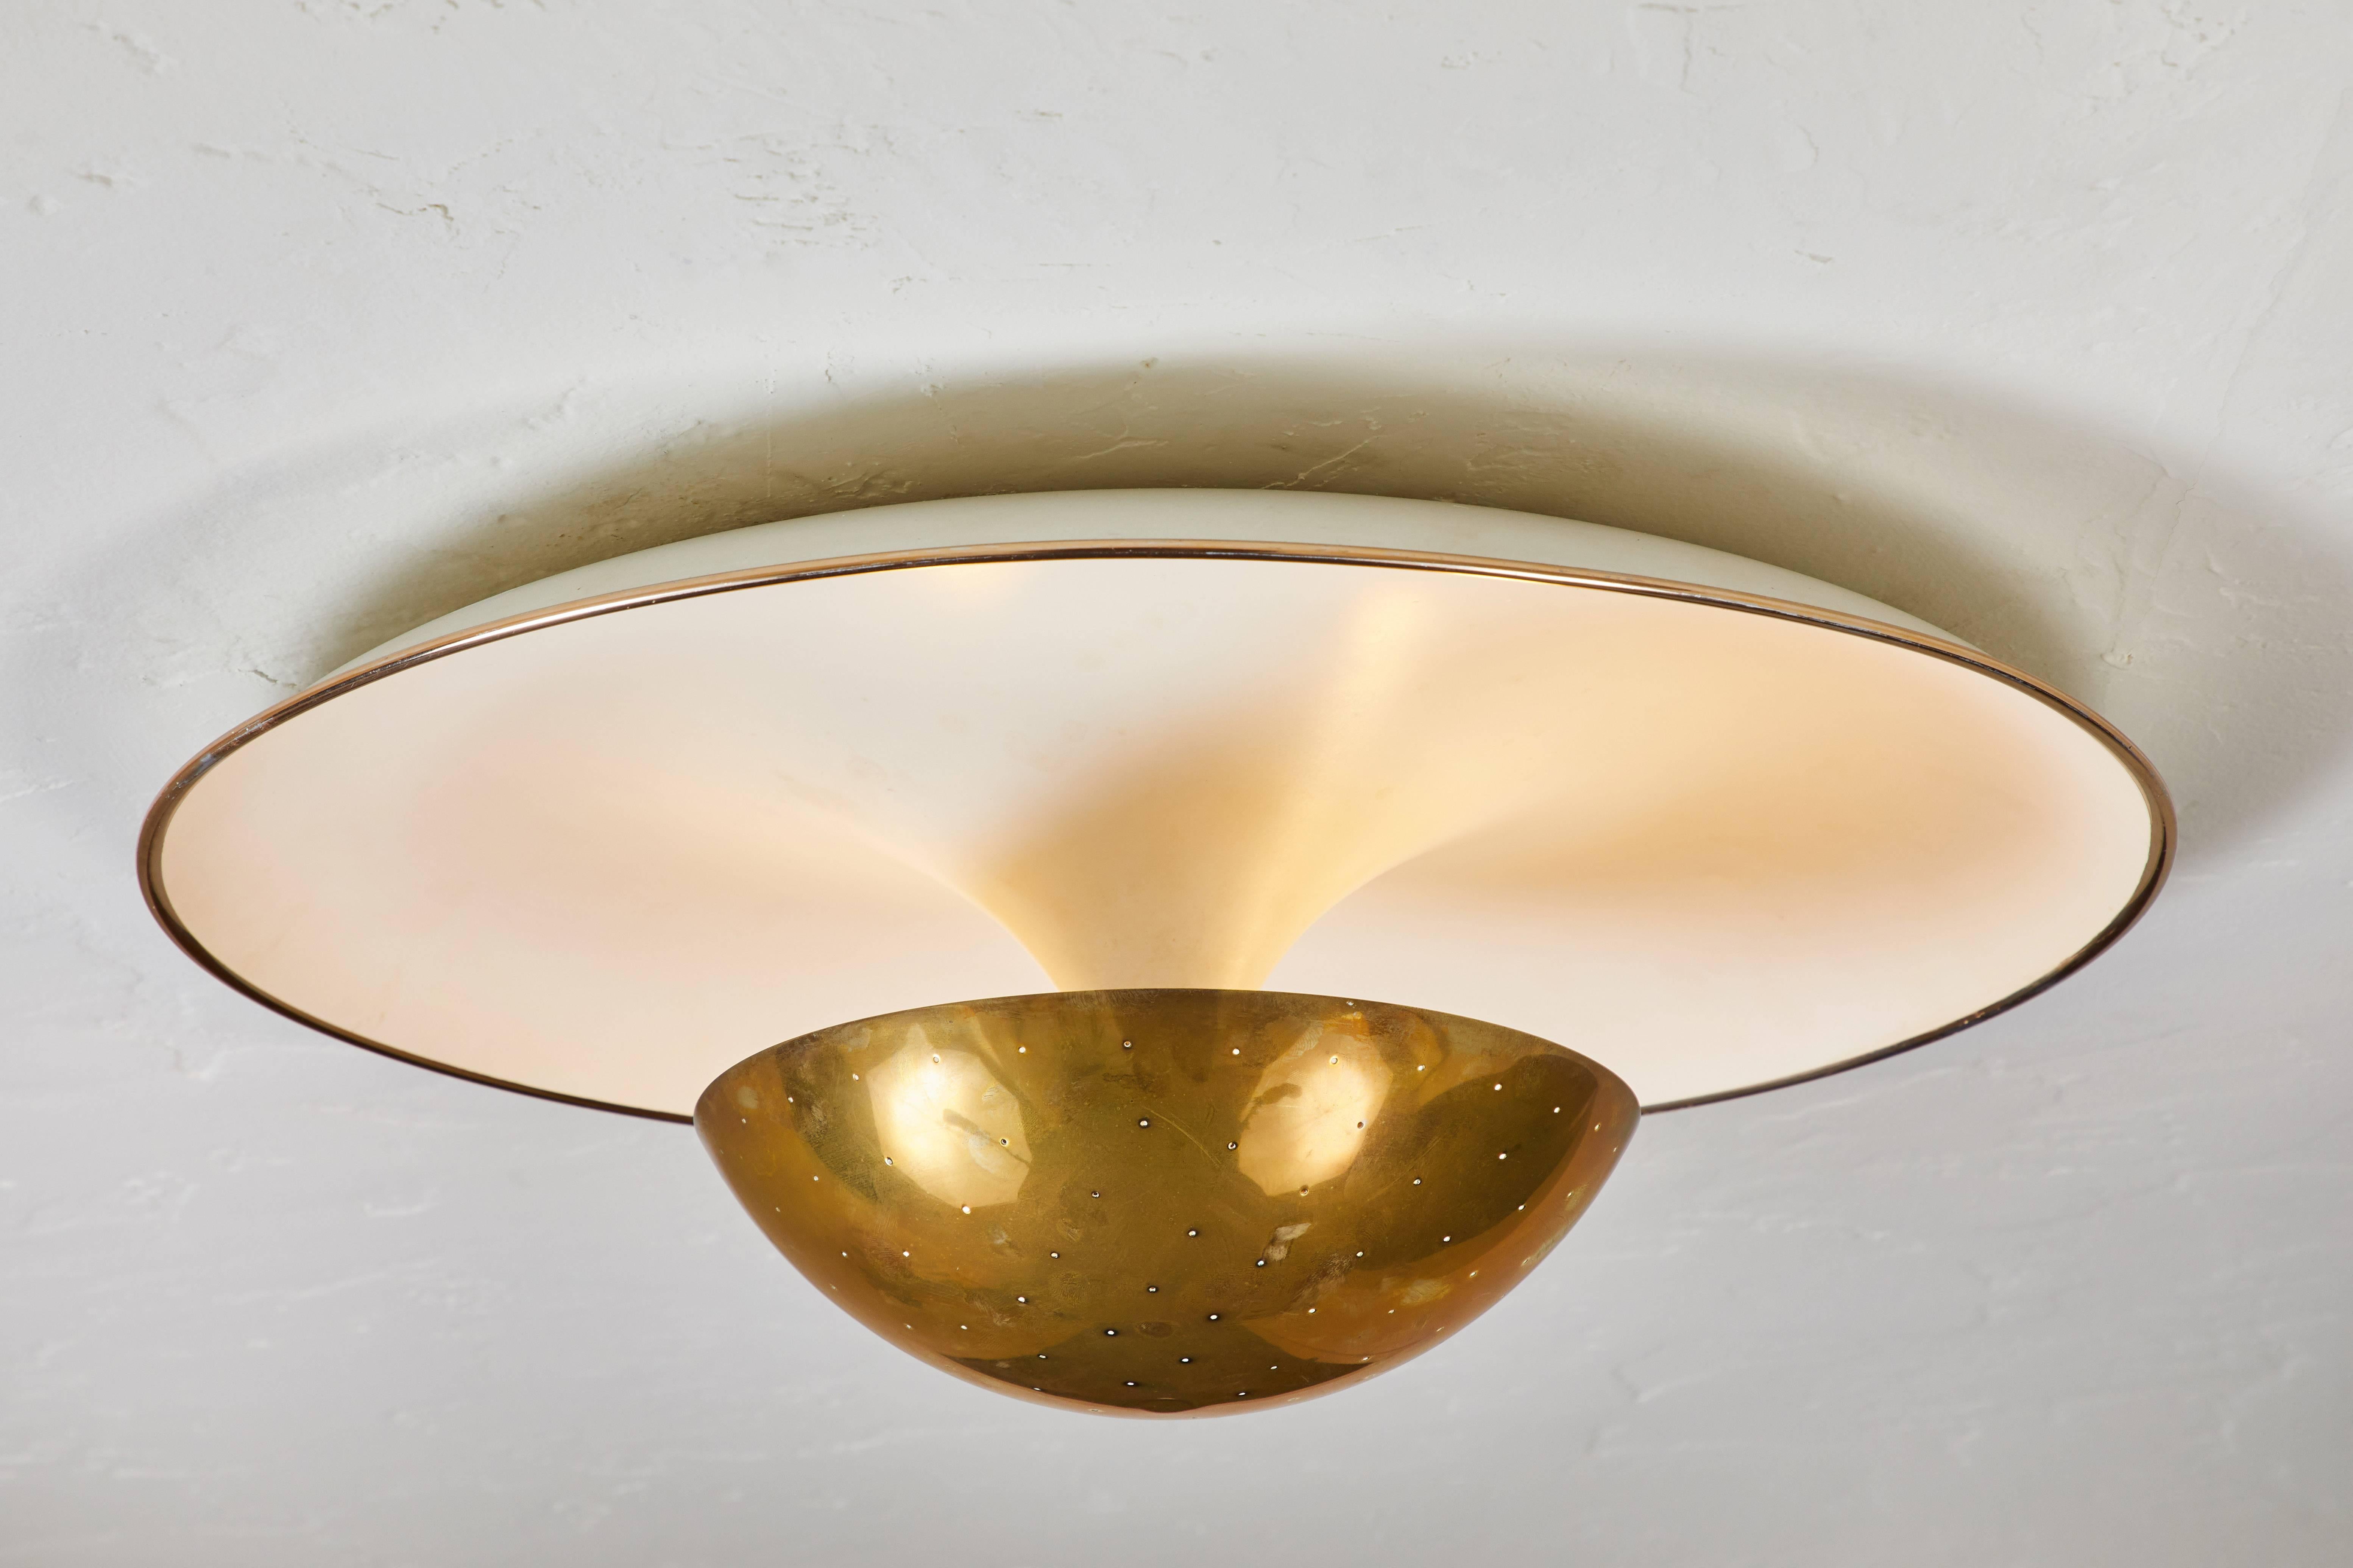 1950s Gino Sarfatti ceiling lamp model #155 for Arteluce. A perforated brass dome on a white painted metal curved plate with a brass detail on the edge. An extremely attractively scaled ceiling or wall light of incomparably refined design. Arteluce